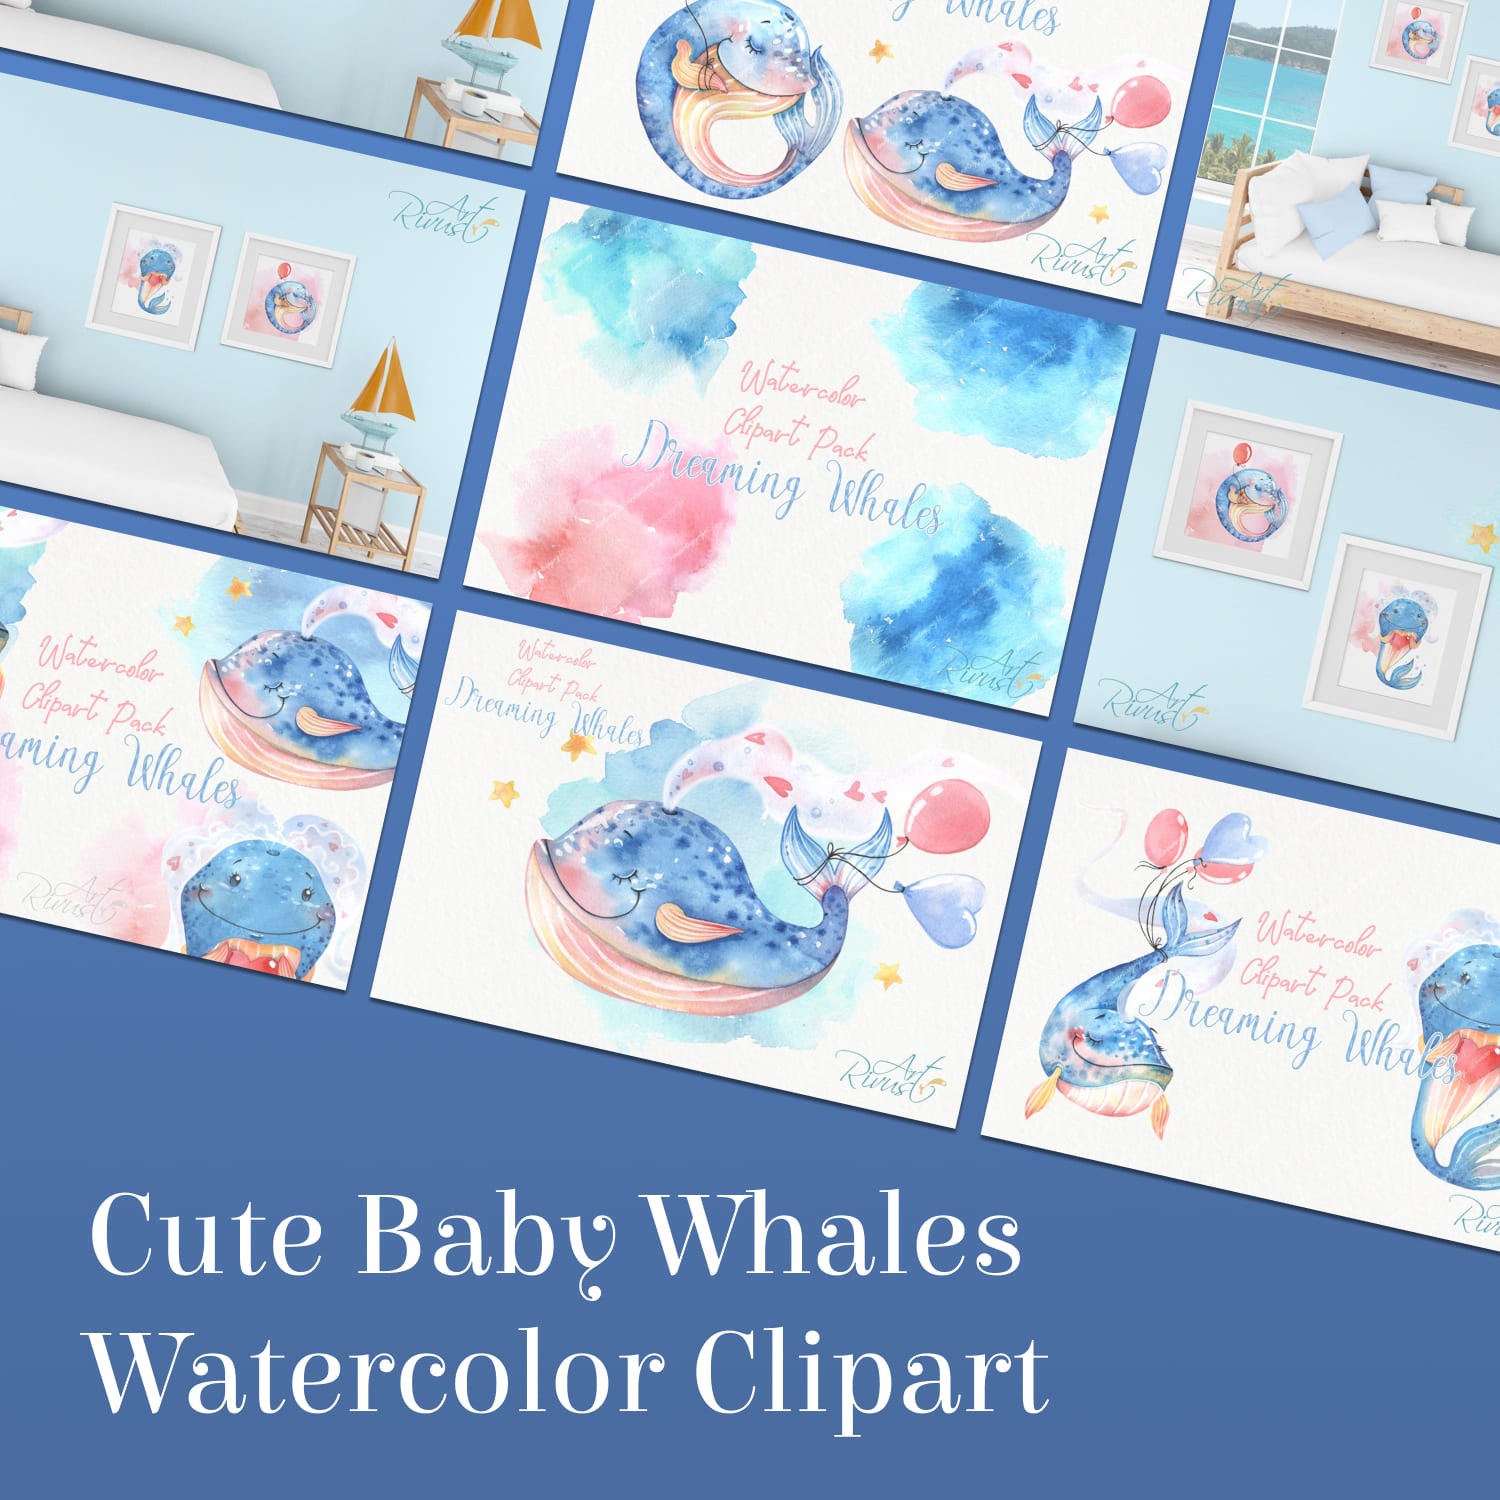 Cute Baby Whales Watercolor Clipart cover image.